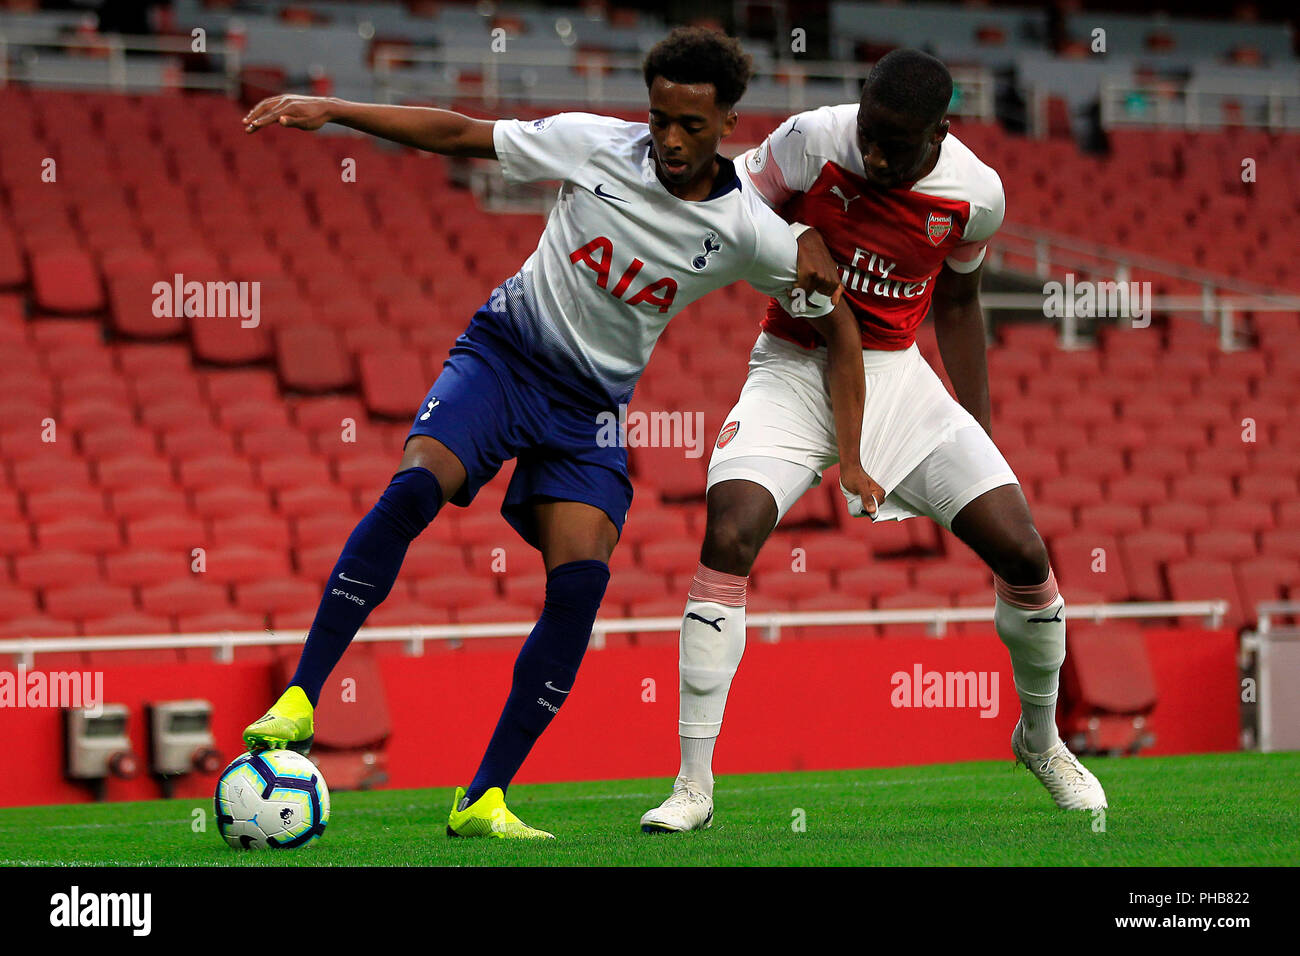 London, UK. 31st August 2018. Tashan Oakley-Boothe of Tottenham (L) in  action with Joseph Olowu of Arsenal (R). PL2 match, Arsenal U23's v  Tottenham Hotspur U23's at the Emirates Stadium in London